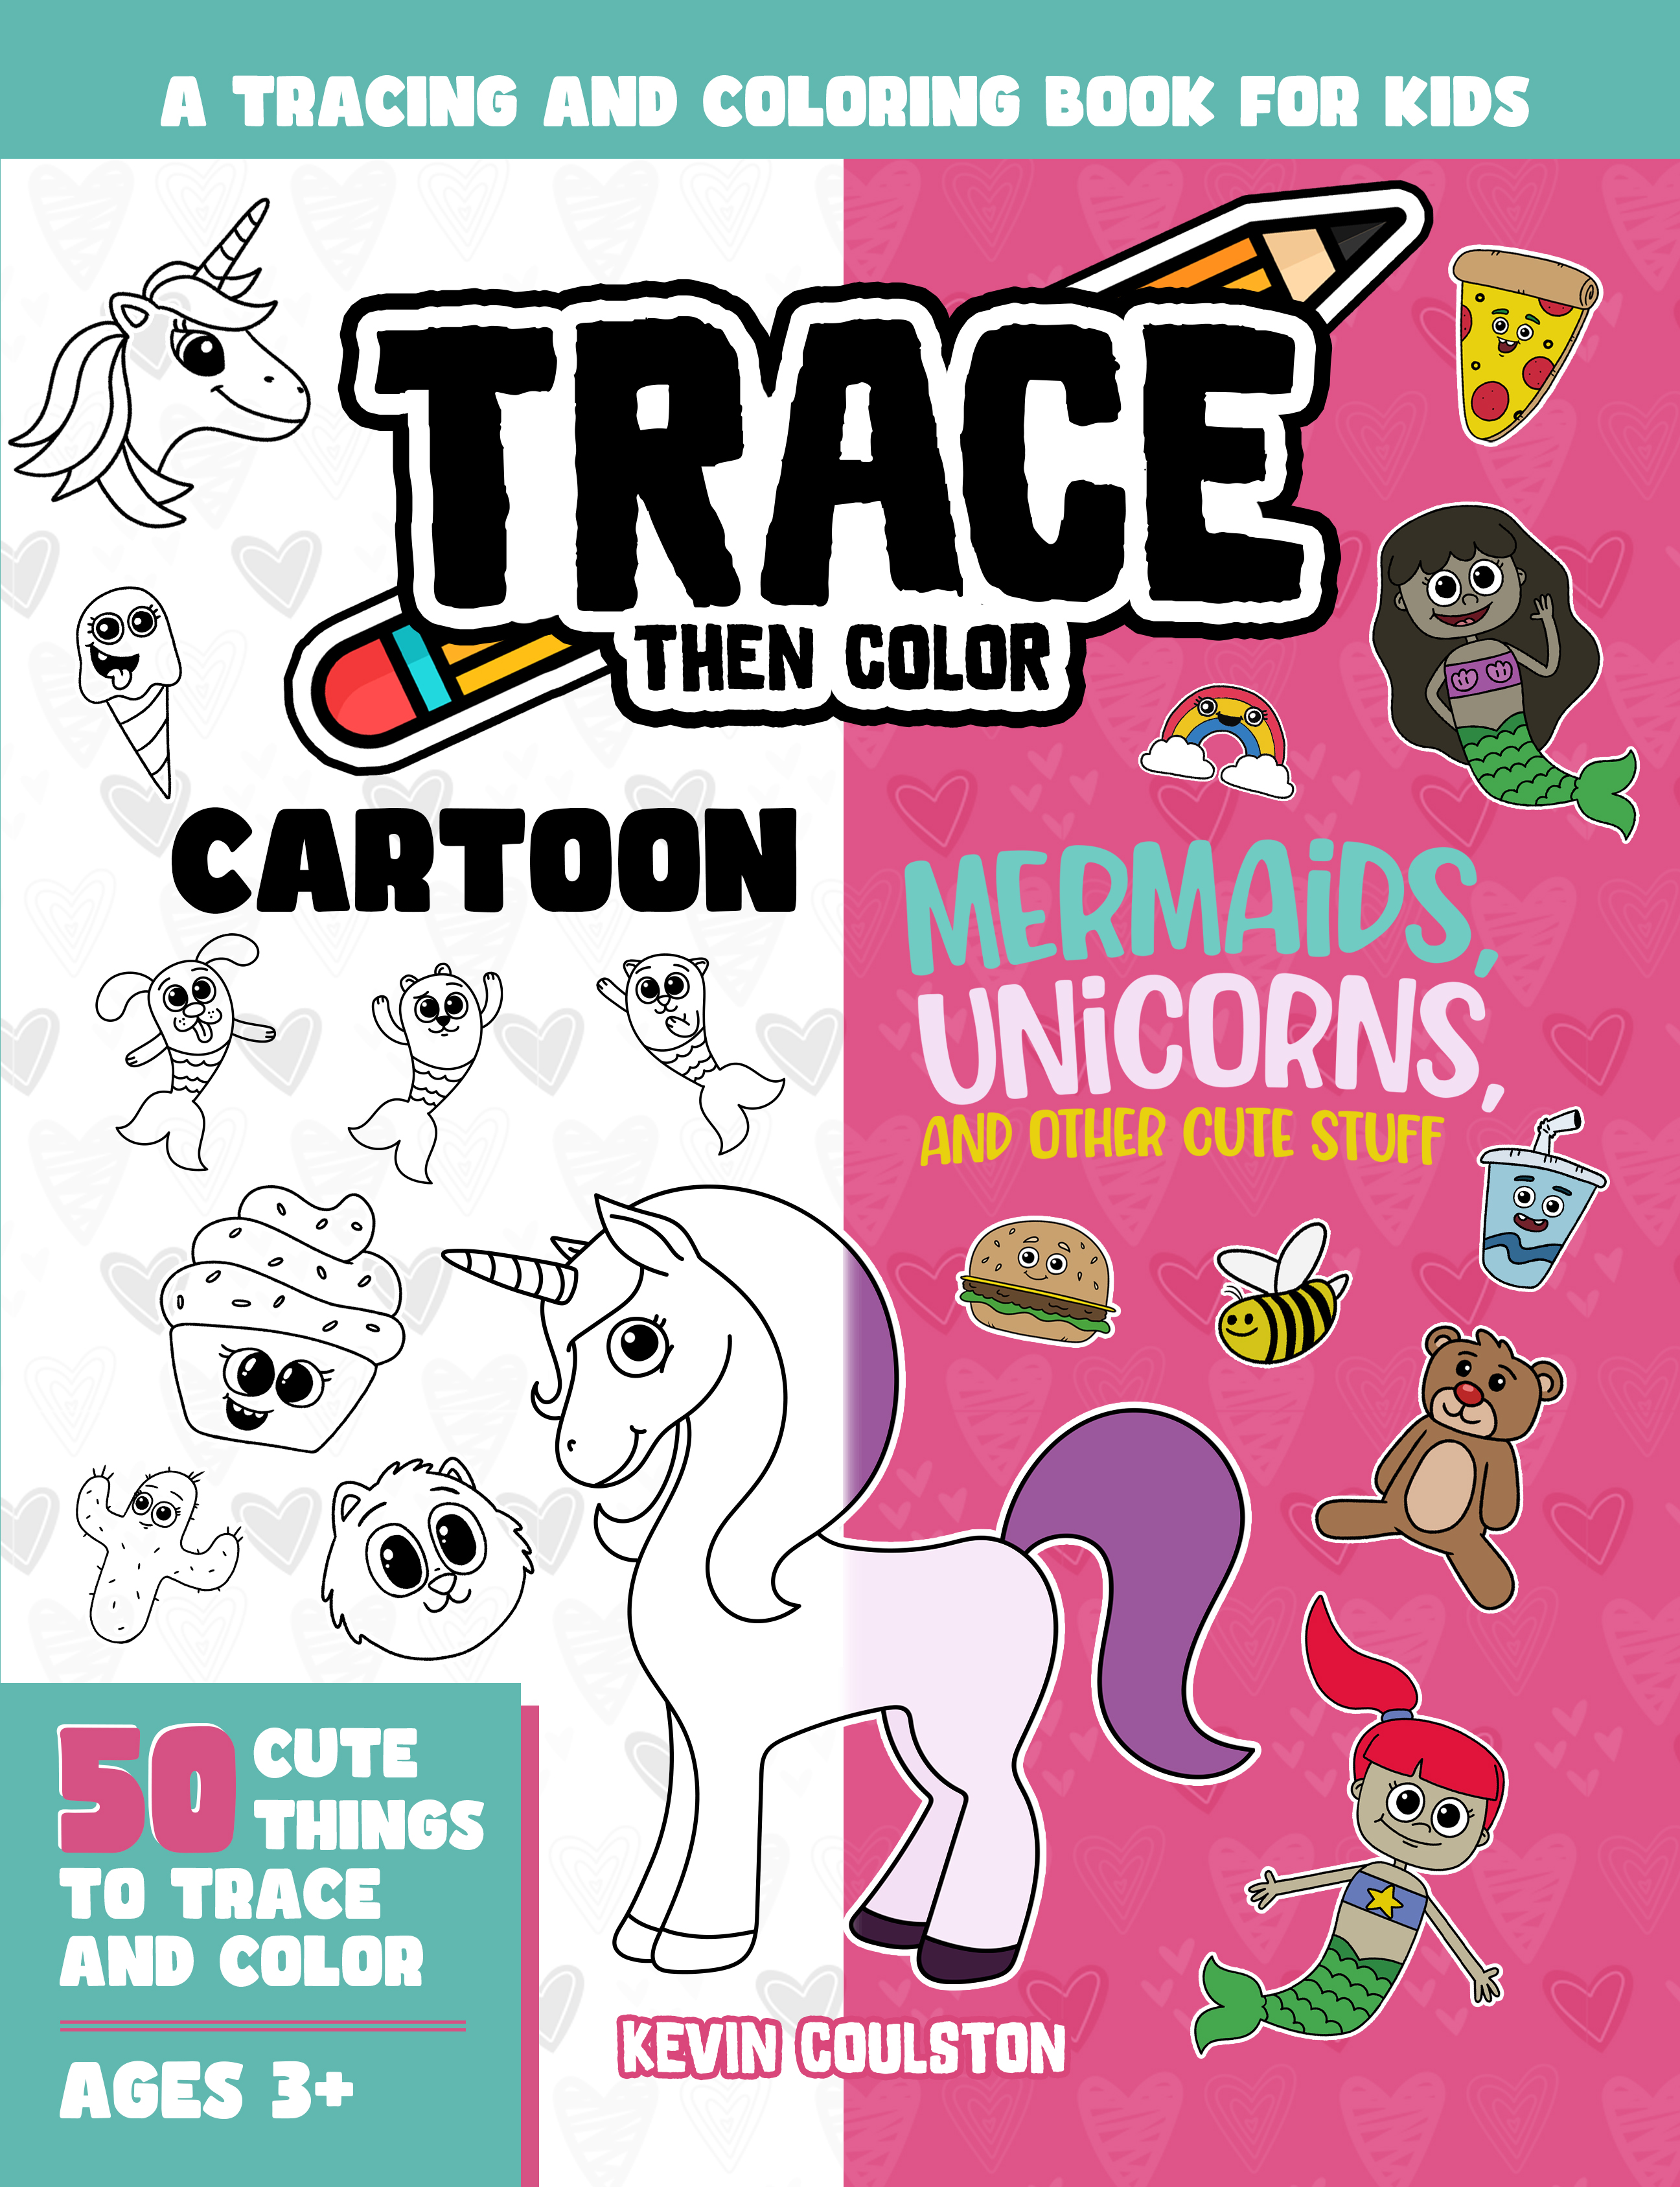 Trace Then Color: Mermaids, Unicorns, and Other Cute Stuff